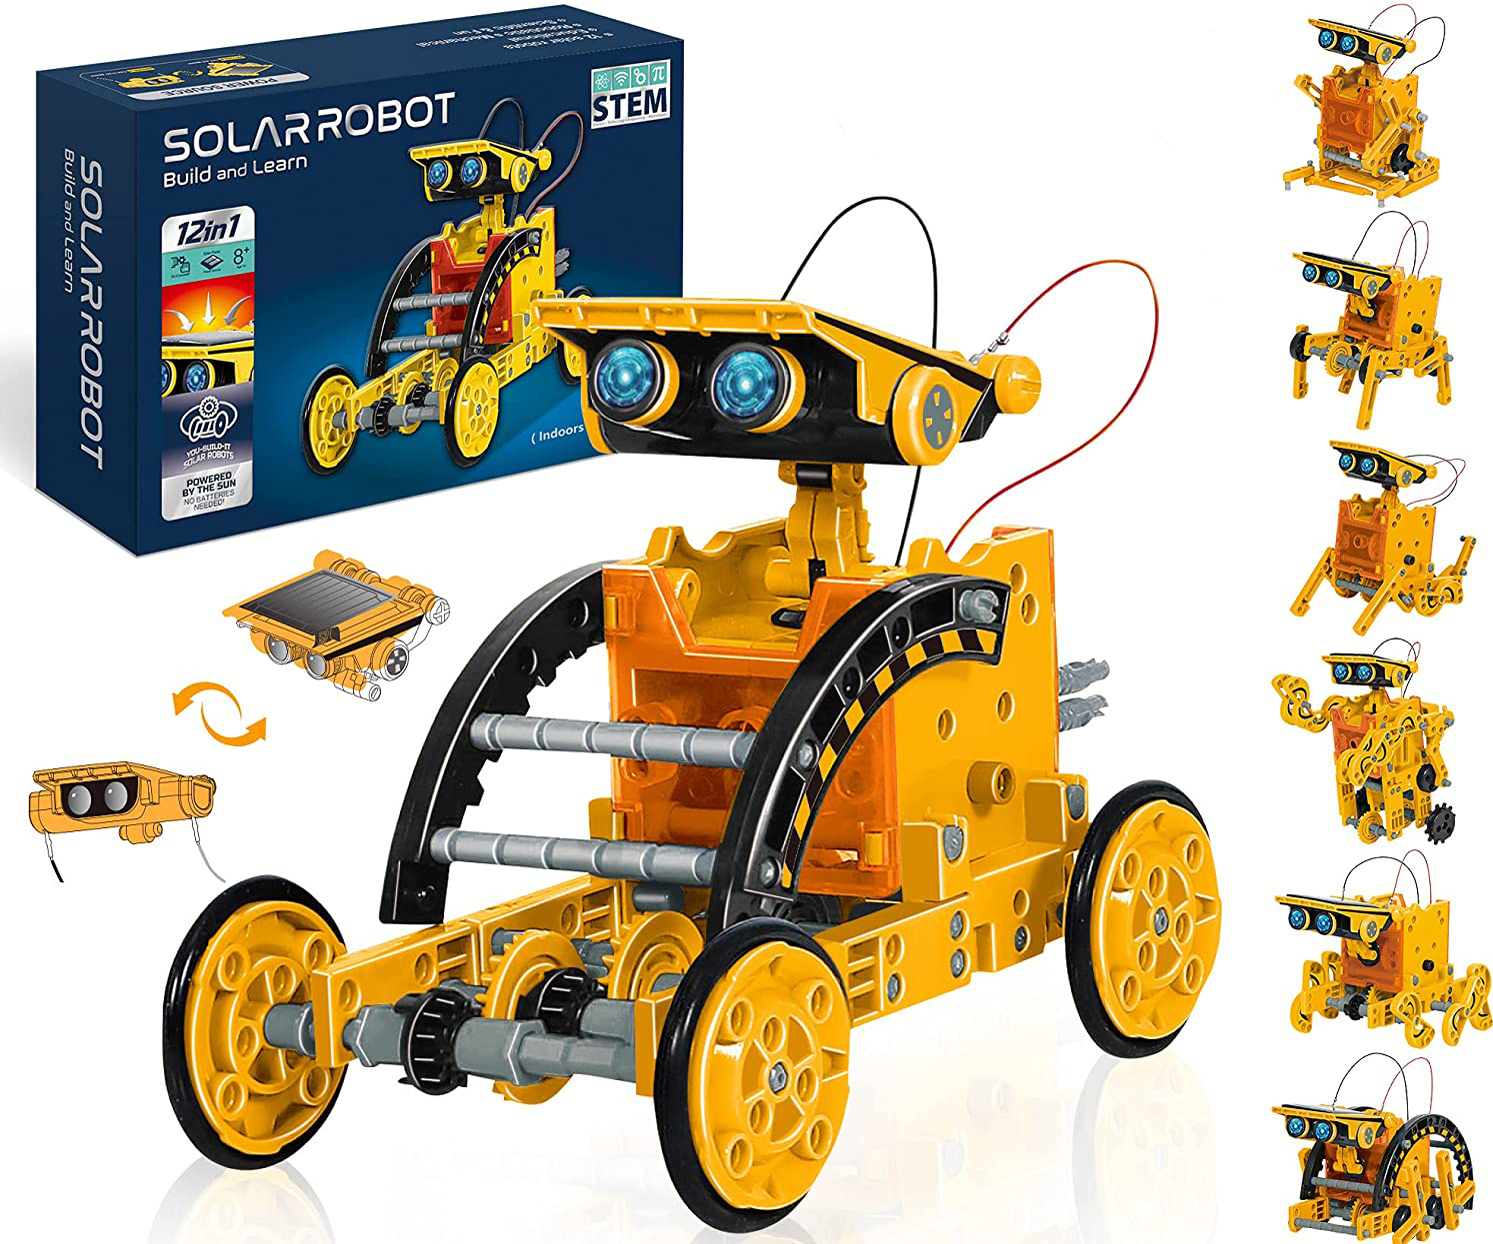 STEM Toys 7-in-1 Solar Robot Kits Space Toys DIY Building Set Science Experiment Kit Engineer Building Activities for Kids Learning & Education Toys Powered by The Sun 200 Pieces